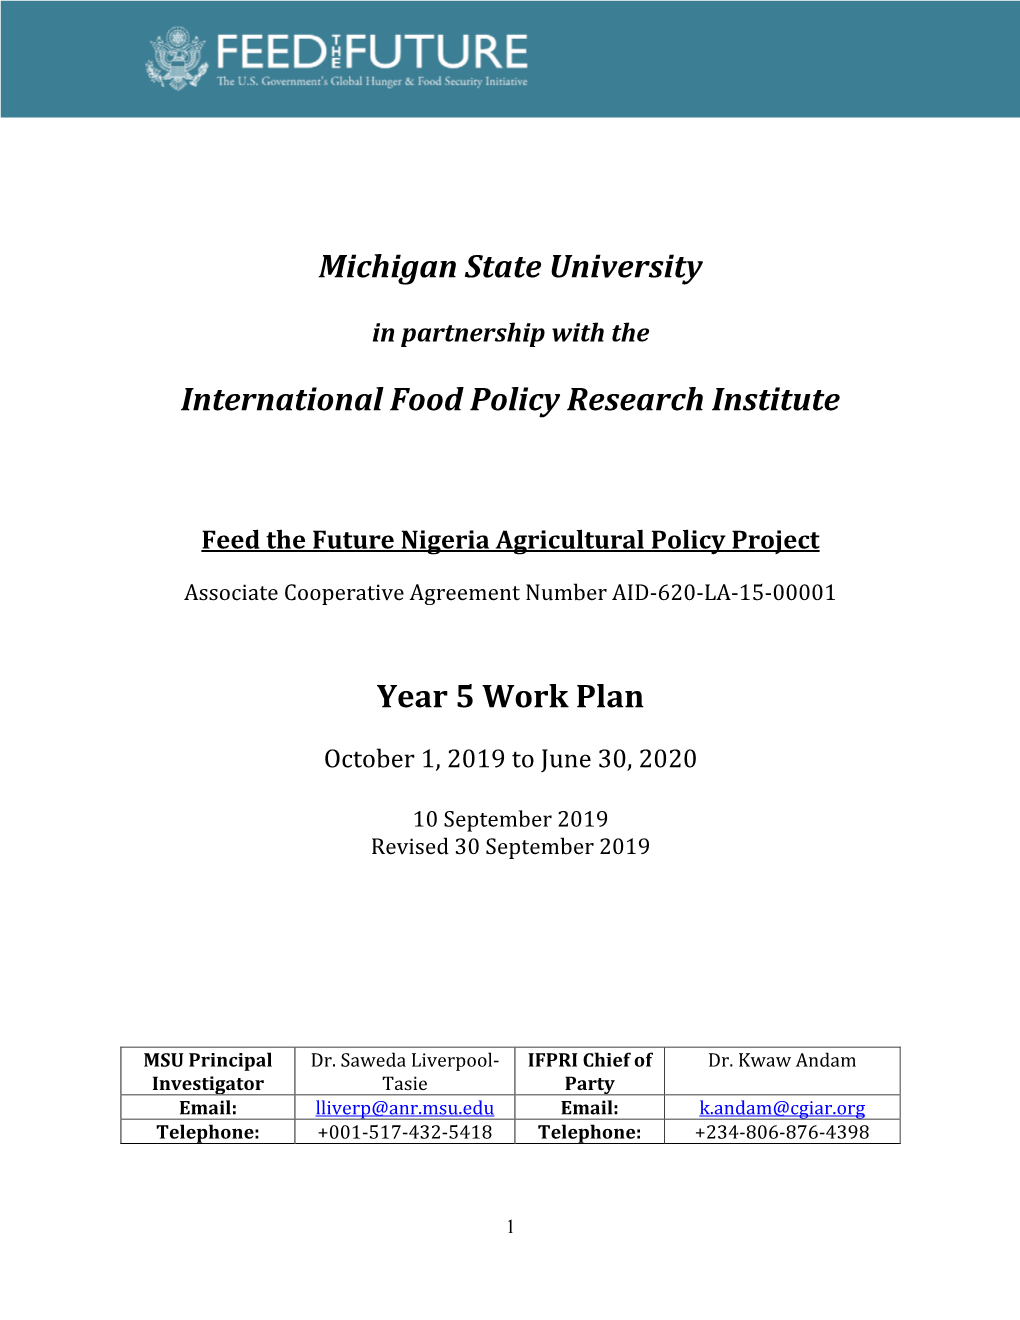 Michigan State University International Food Policy Research Institute